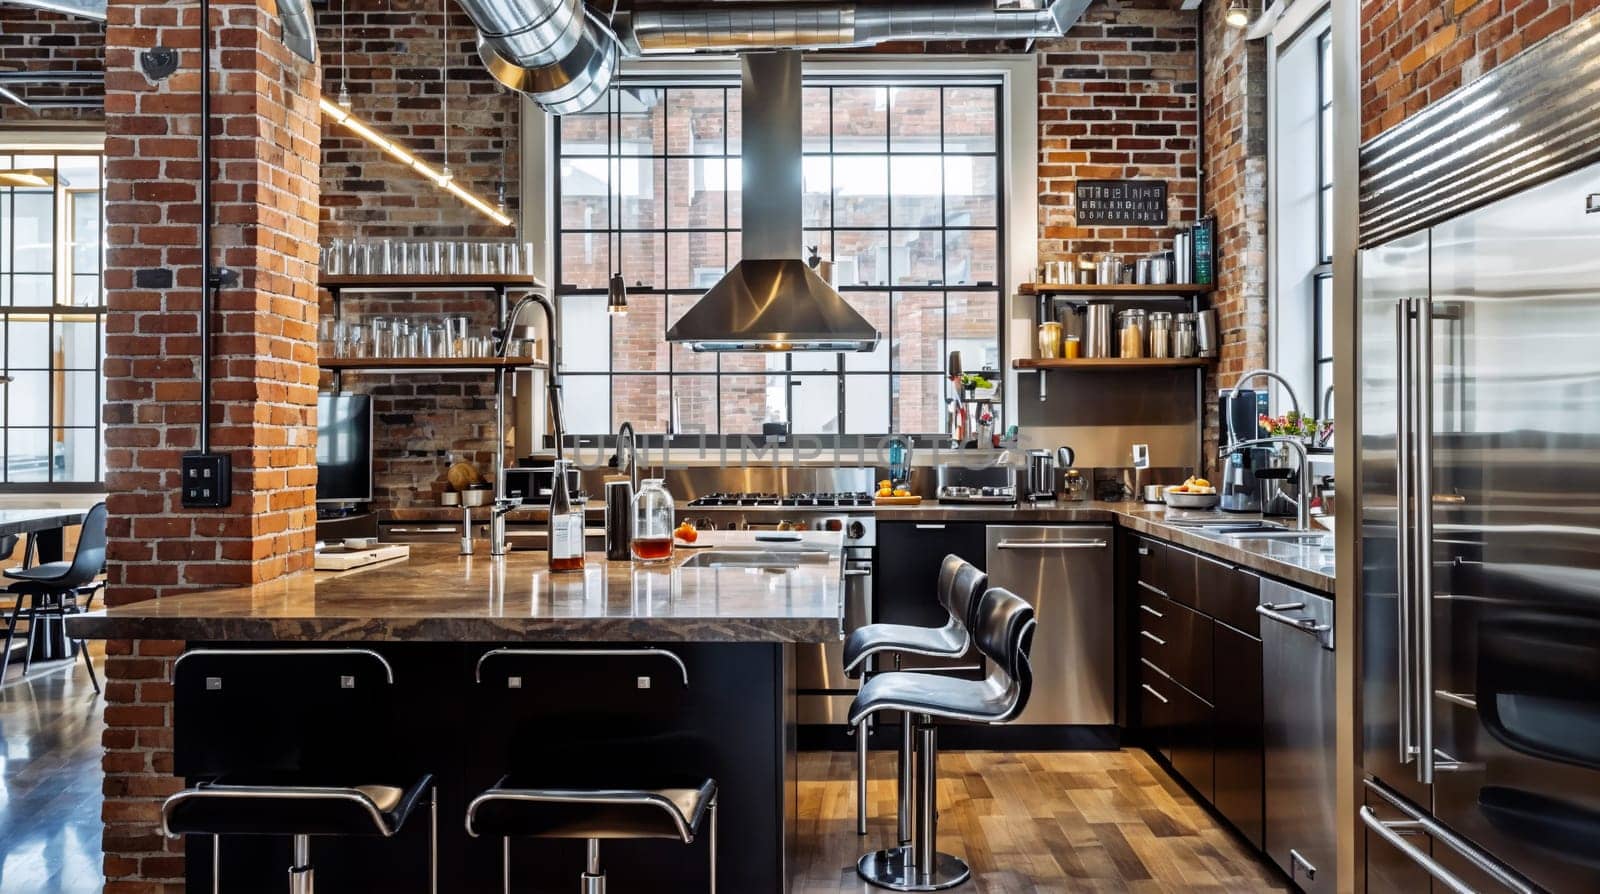 Modern Urban Kitchen With Exposed Brick Walls and Industrial Accents by chrisroll